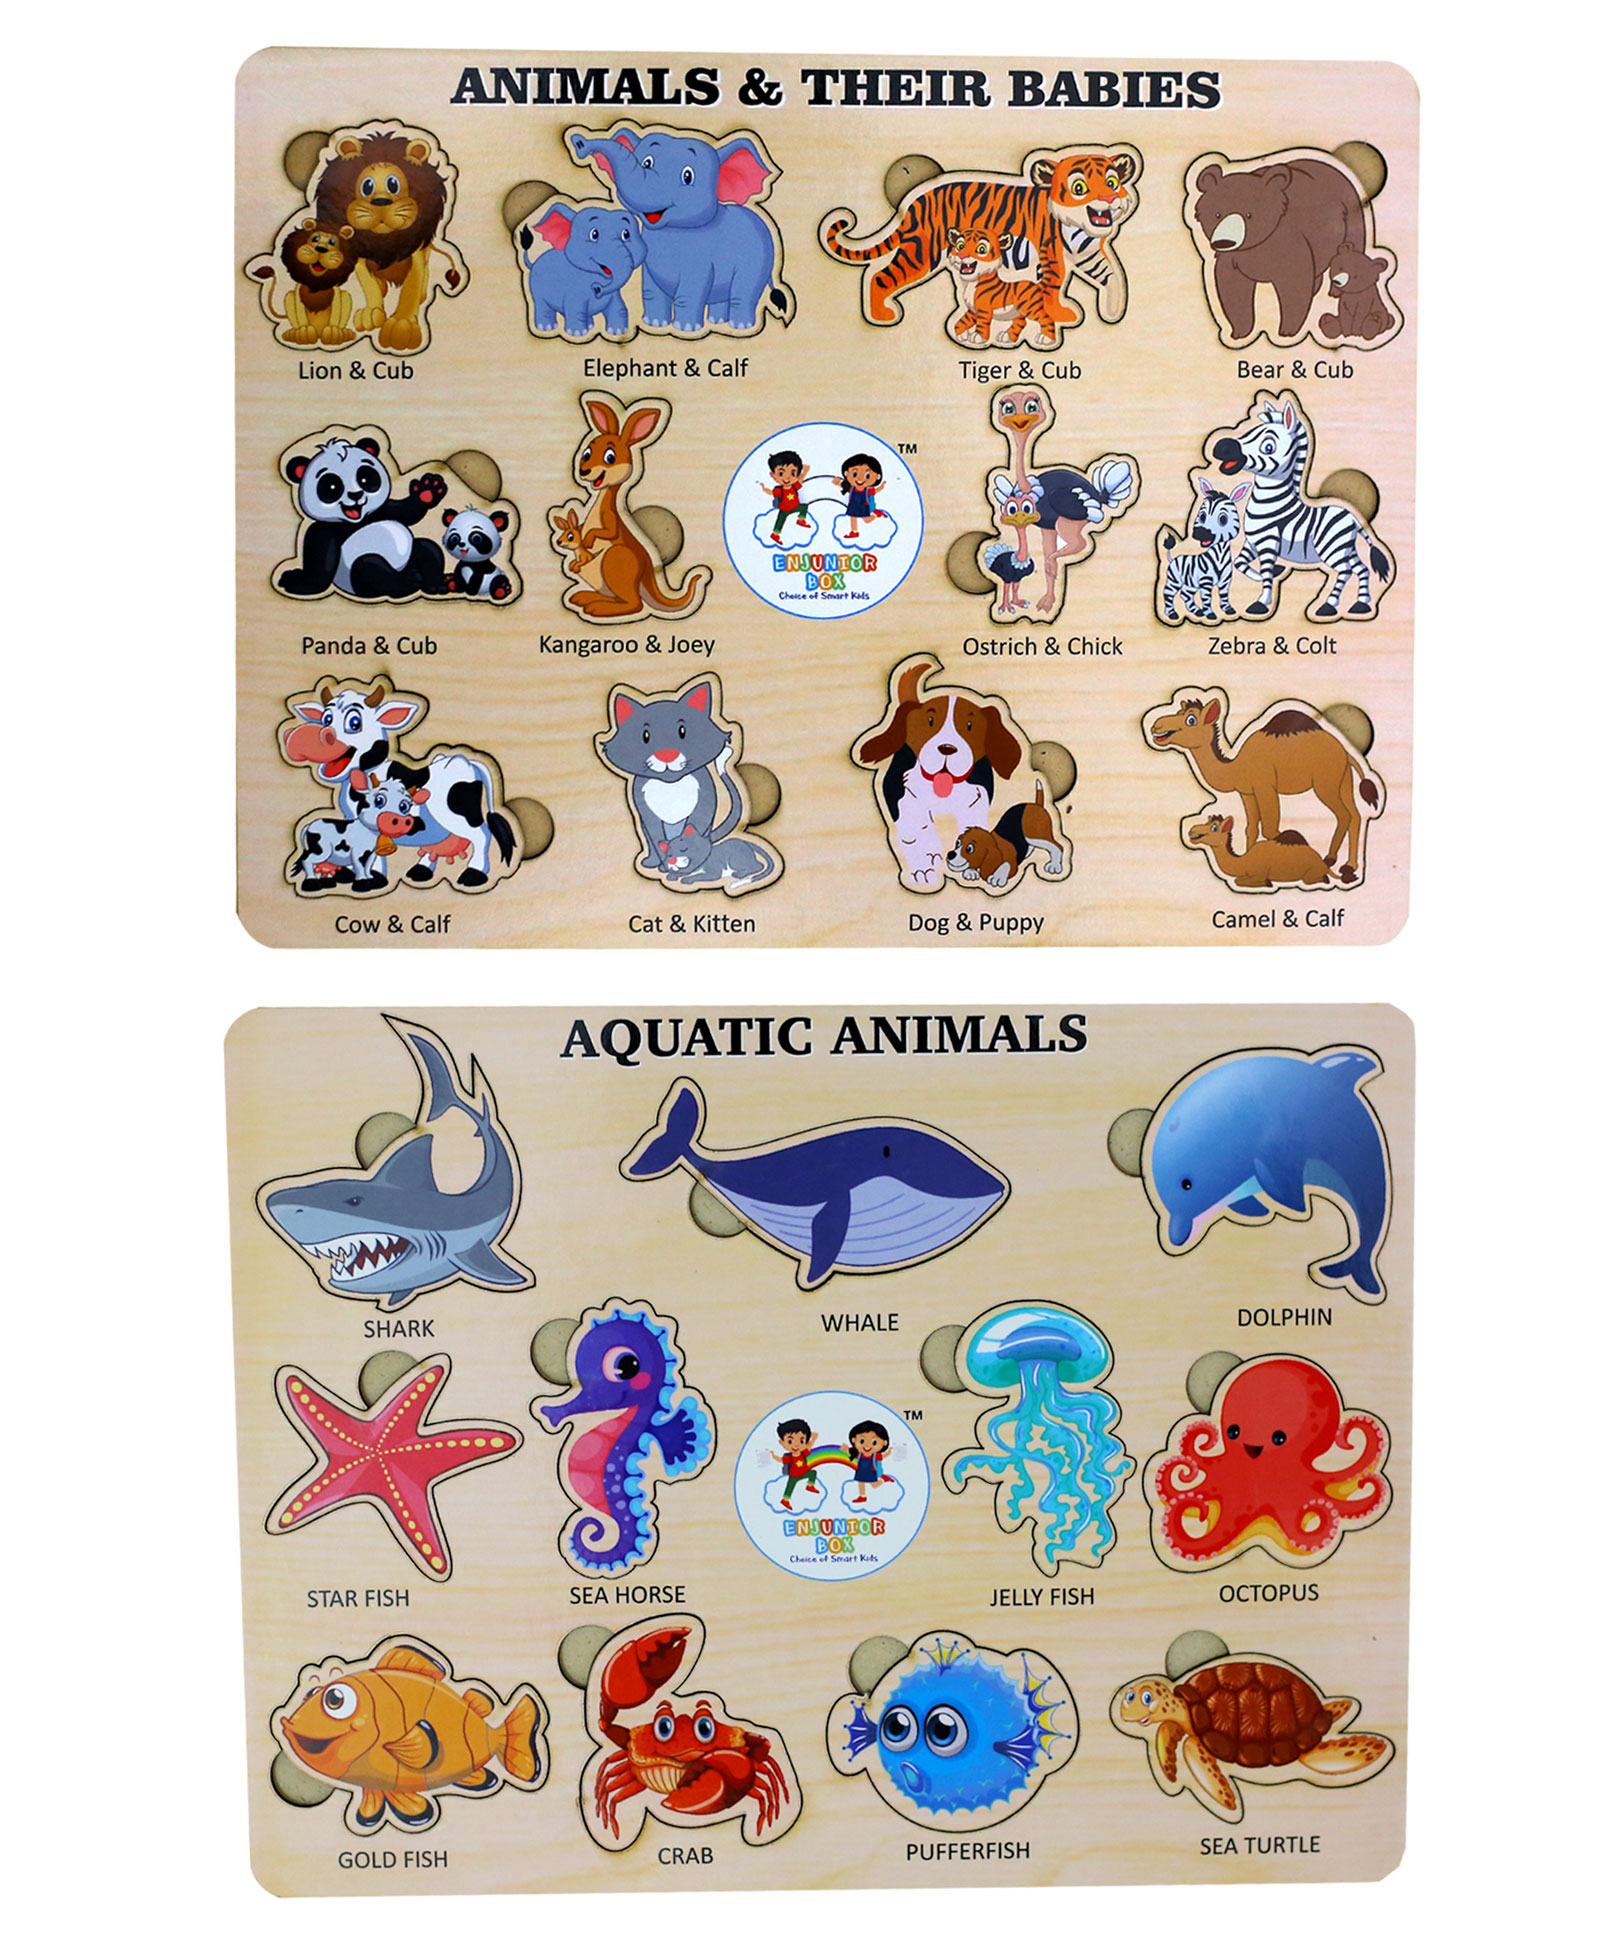 Enjunior Box Wooden Aquatic Animals & Animals & Their Babies Puzzle with  Knobs Multicolour - 23 Pieces Online India, Buy Puzzle Games & Toys for  (0-24 Months) at  - 10345510